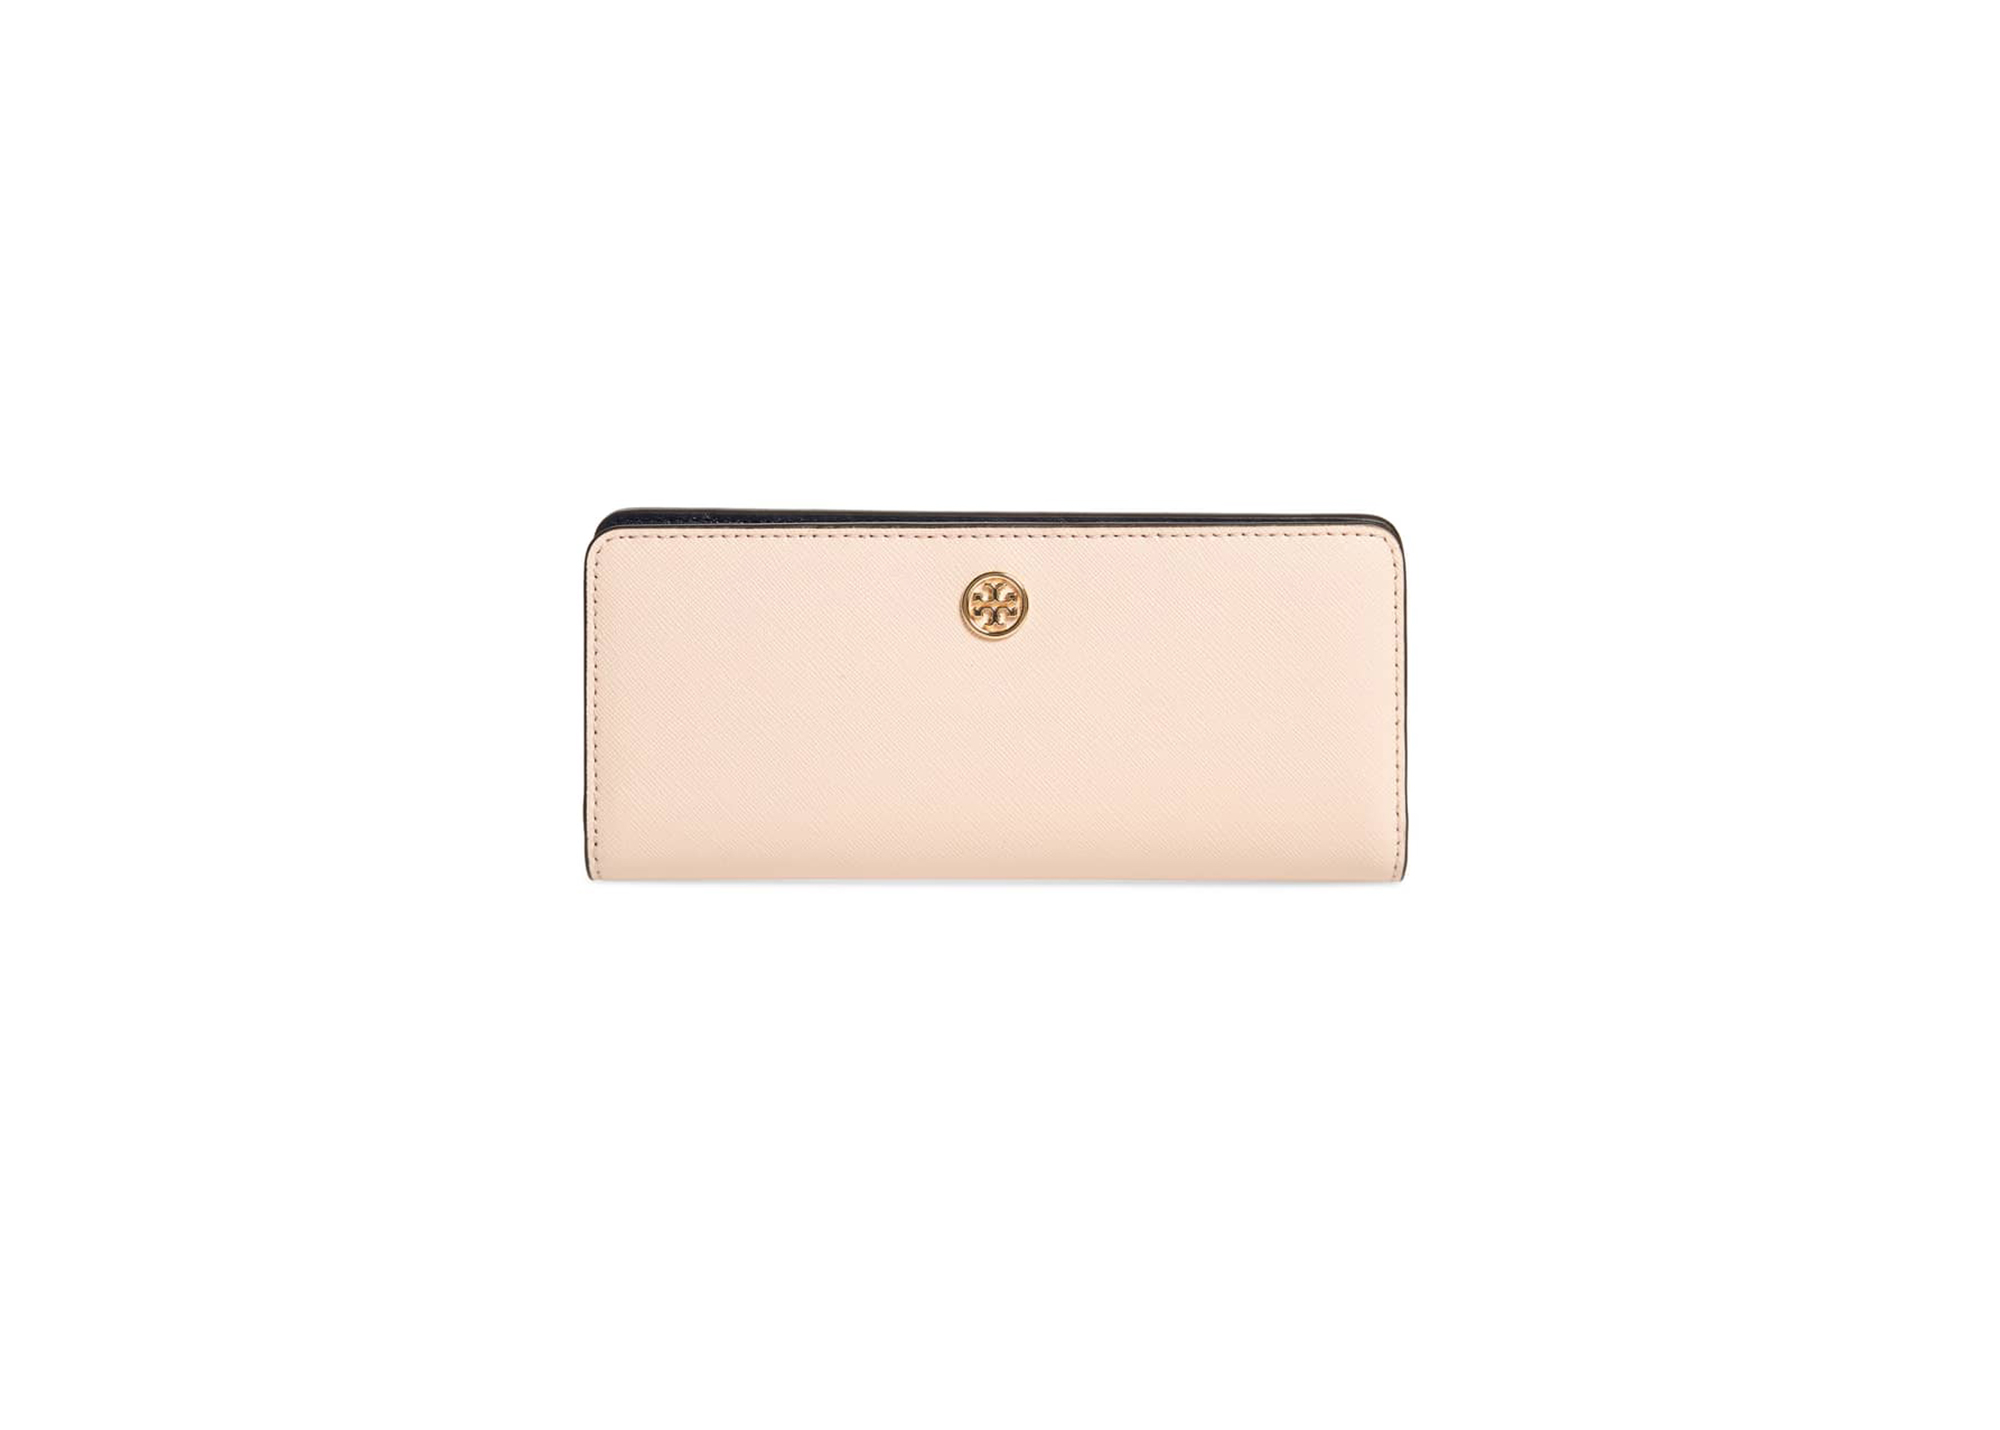 A Sleek Tory Burch Wallet Is on Sale That Can Double as a Clutch